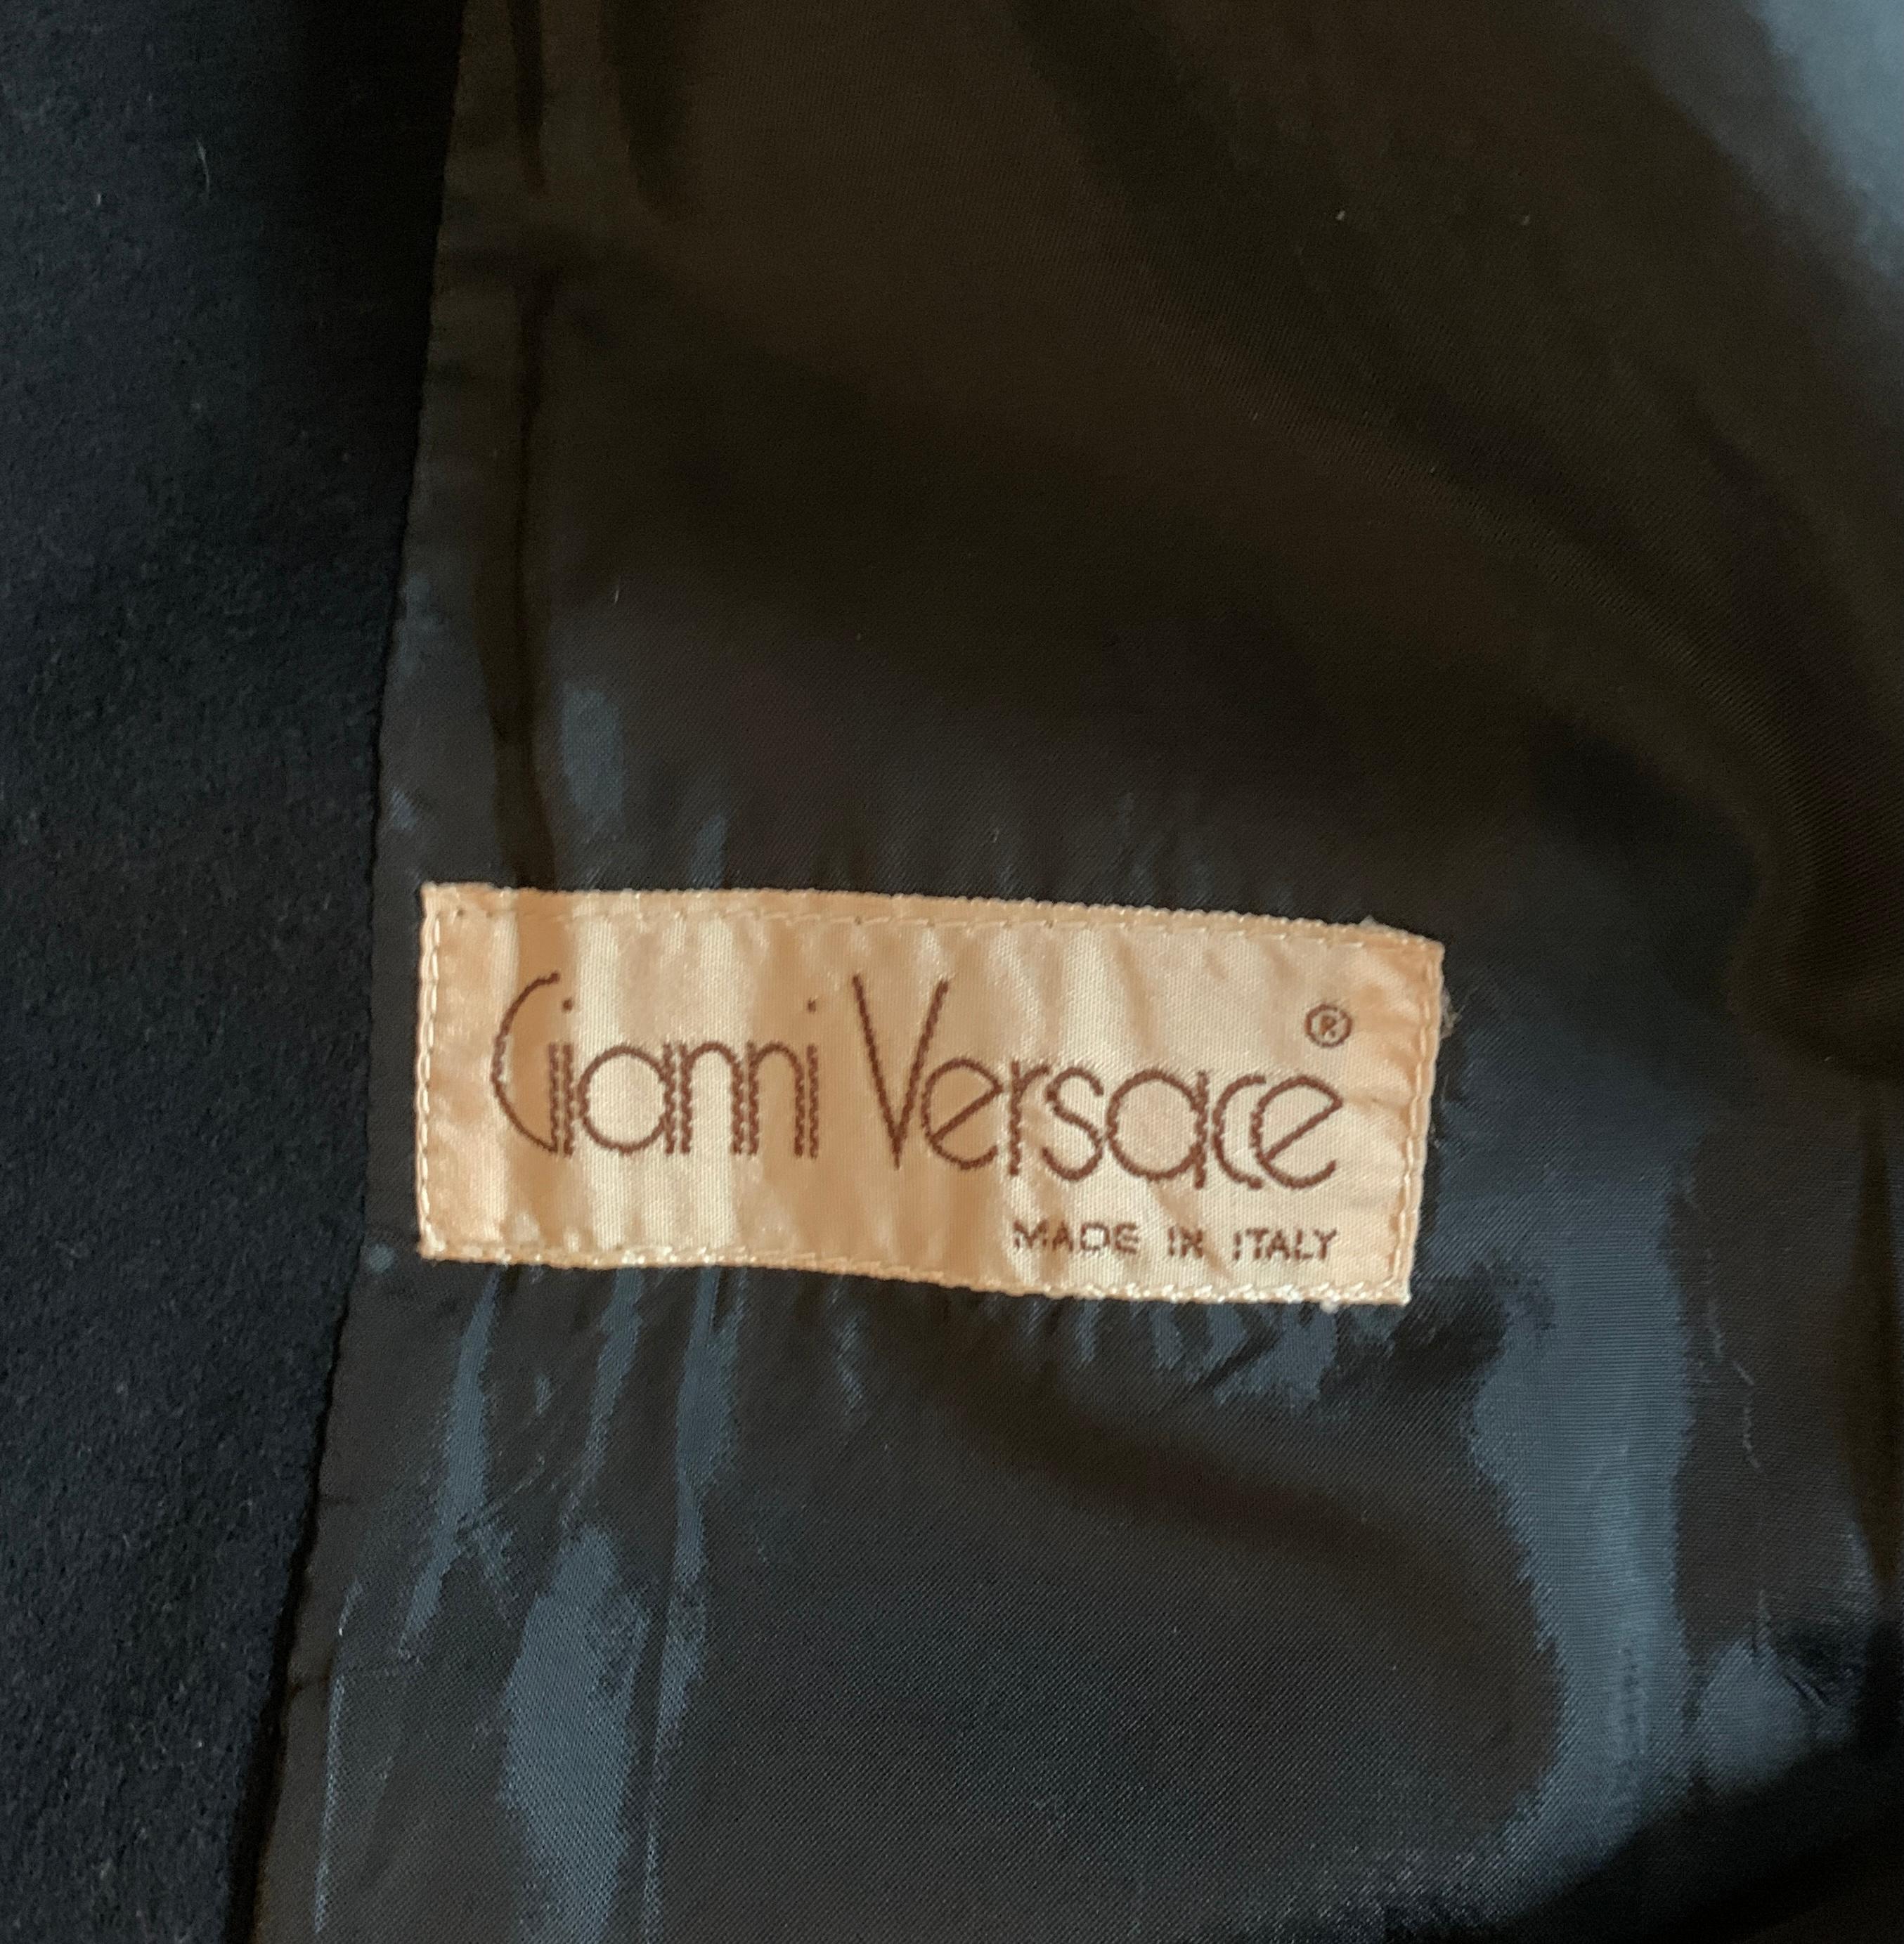 Gianni Versace 1980s Black Wool Blazer with Silver Toggle Style Buttons 2